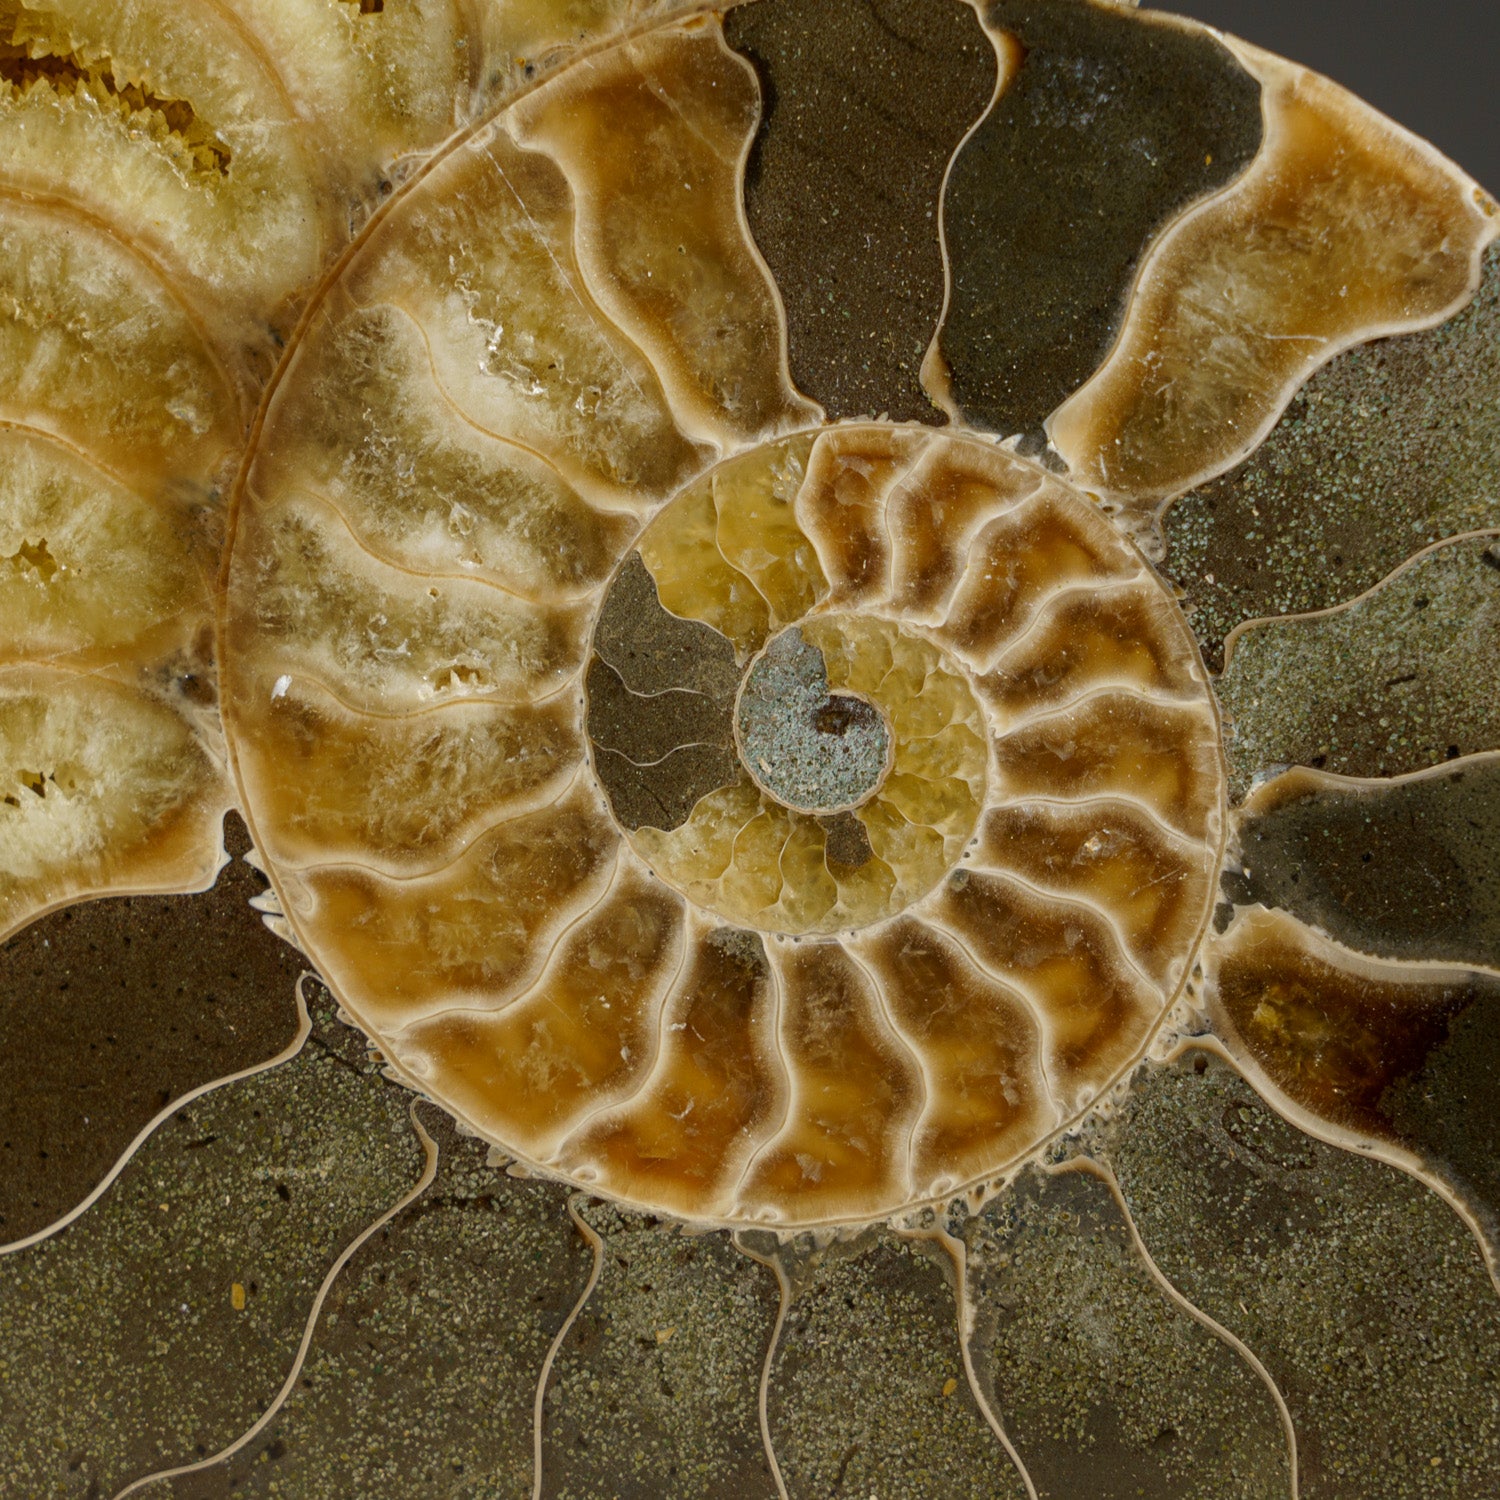 Calcified Ammonite Halve From Madagascar (292.5 grams)